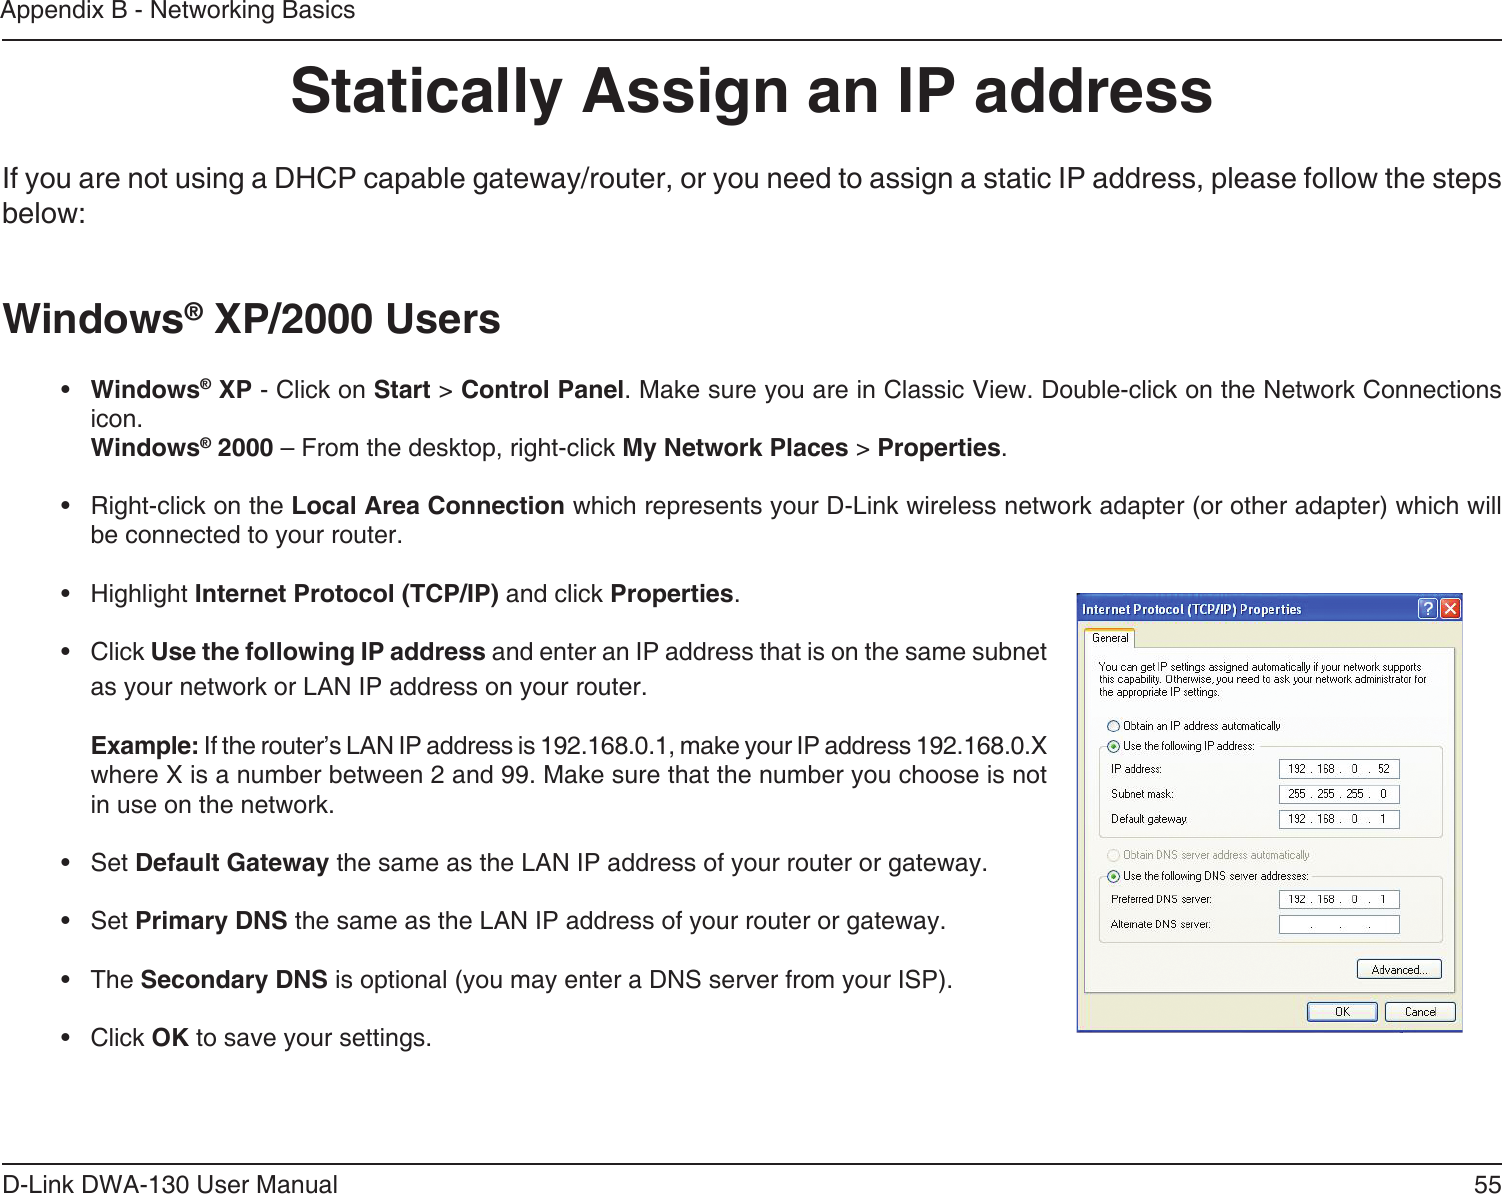 55D-Link DWA-130 User ManualAppendix B - Networking BasicsStatically Assign an IP addressIf you are not using a DHCP capable gateway/router, or you need to assign a static IP address, please follow the steps below:Windows® XP/2000 Users•  Windows® XP - Click on Start &gt; Control Panel. Make sure you are in Classic View. Double-click on the Network Connections icon. Windows® 2000 – From the desktop, right-click My Network Places &gt; Properties.•  Right-click on the Local Area Connection which represents your D-Link wireless network adapter (or other adapter) which will be connected to your router.•  Highlight Internet Protocol (TCP/IP) and click Properties.•  Click Use the following IP address and enter an IP address that is on the same subnet as your network or LAN IP address on your router. Example: If the router’s LAN IP address is 192.168.0.1, make your IP address 192.168.0.X where X is a number between 2 and 99. Make sure that the number you choose is not in use on the network. •  Set Default Gateway the same as the LAN IP address of your router or gateway.•  Set Primary DNS the same as the LAN IP address of your router or gateway. •  The Secondary DNS is optional (you may enter a DNS server from your ISP).•  Click OK to save your settings.